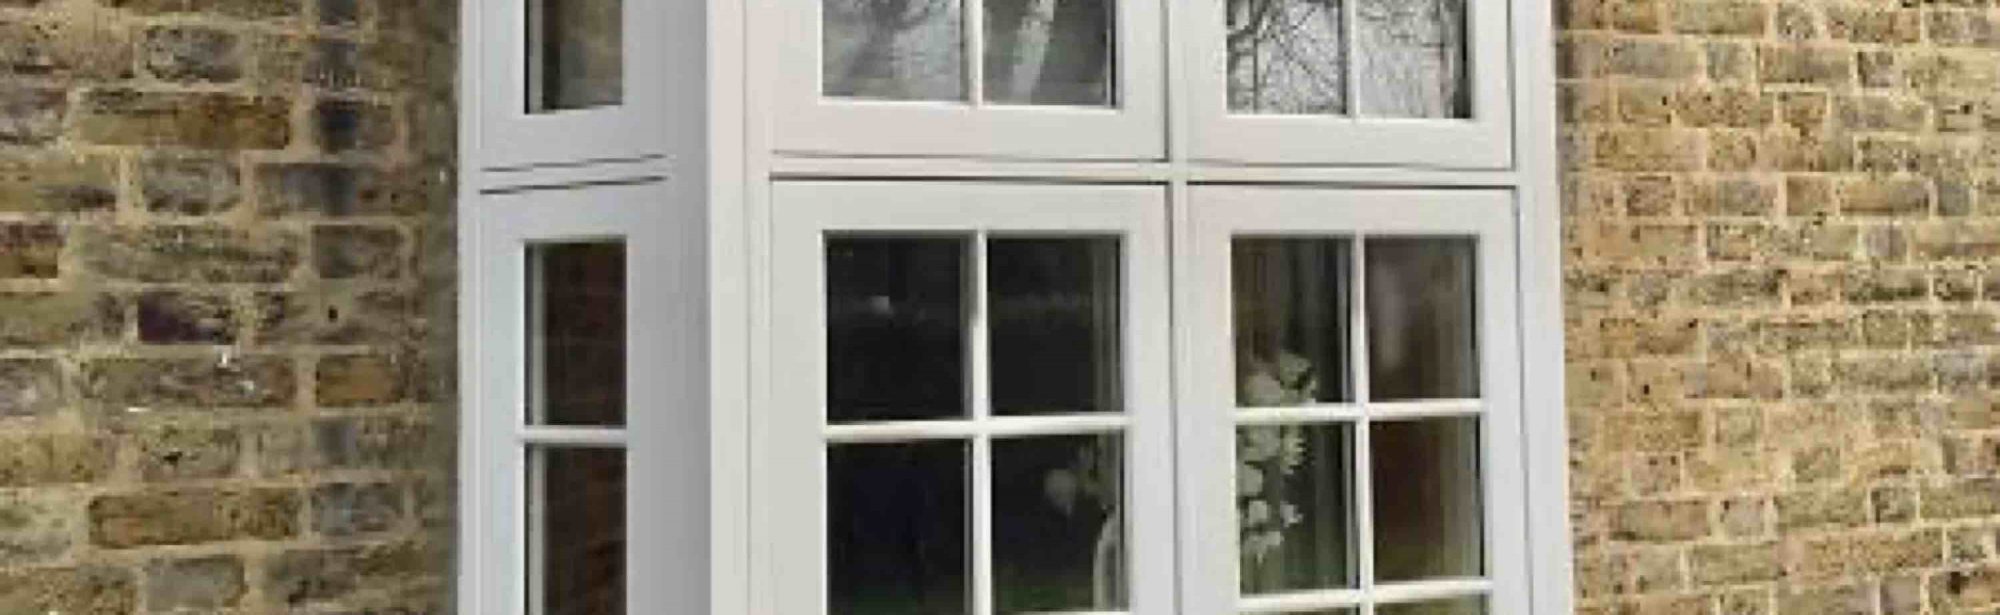 The difference between casement windows and sash windows